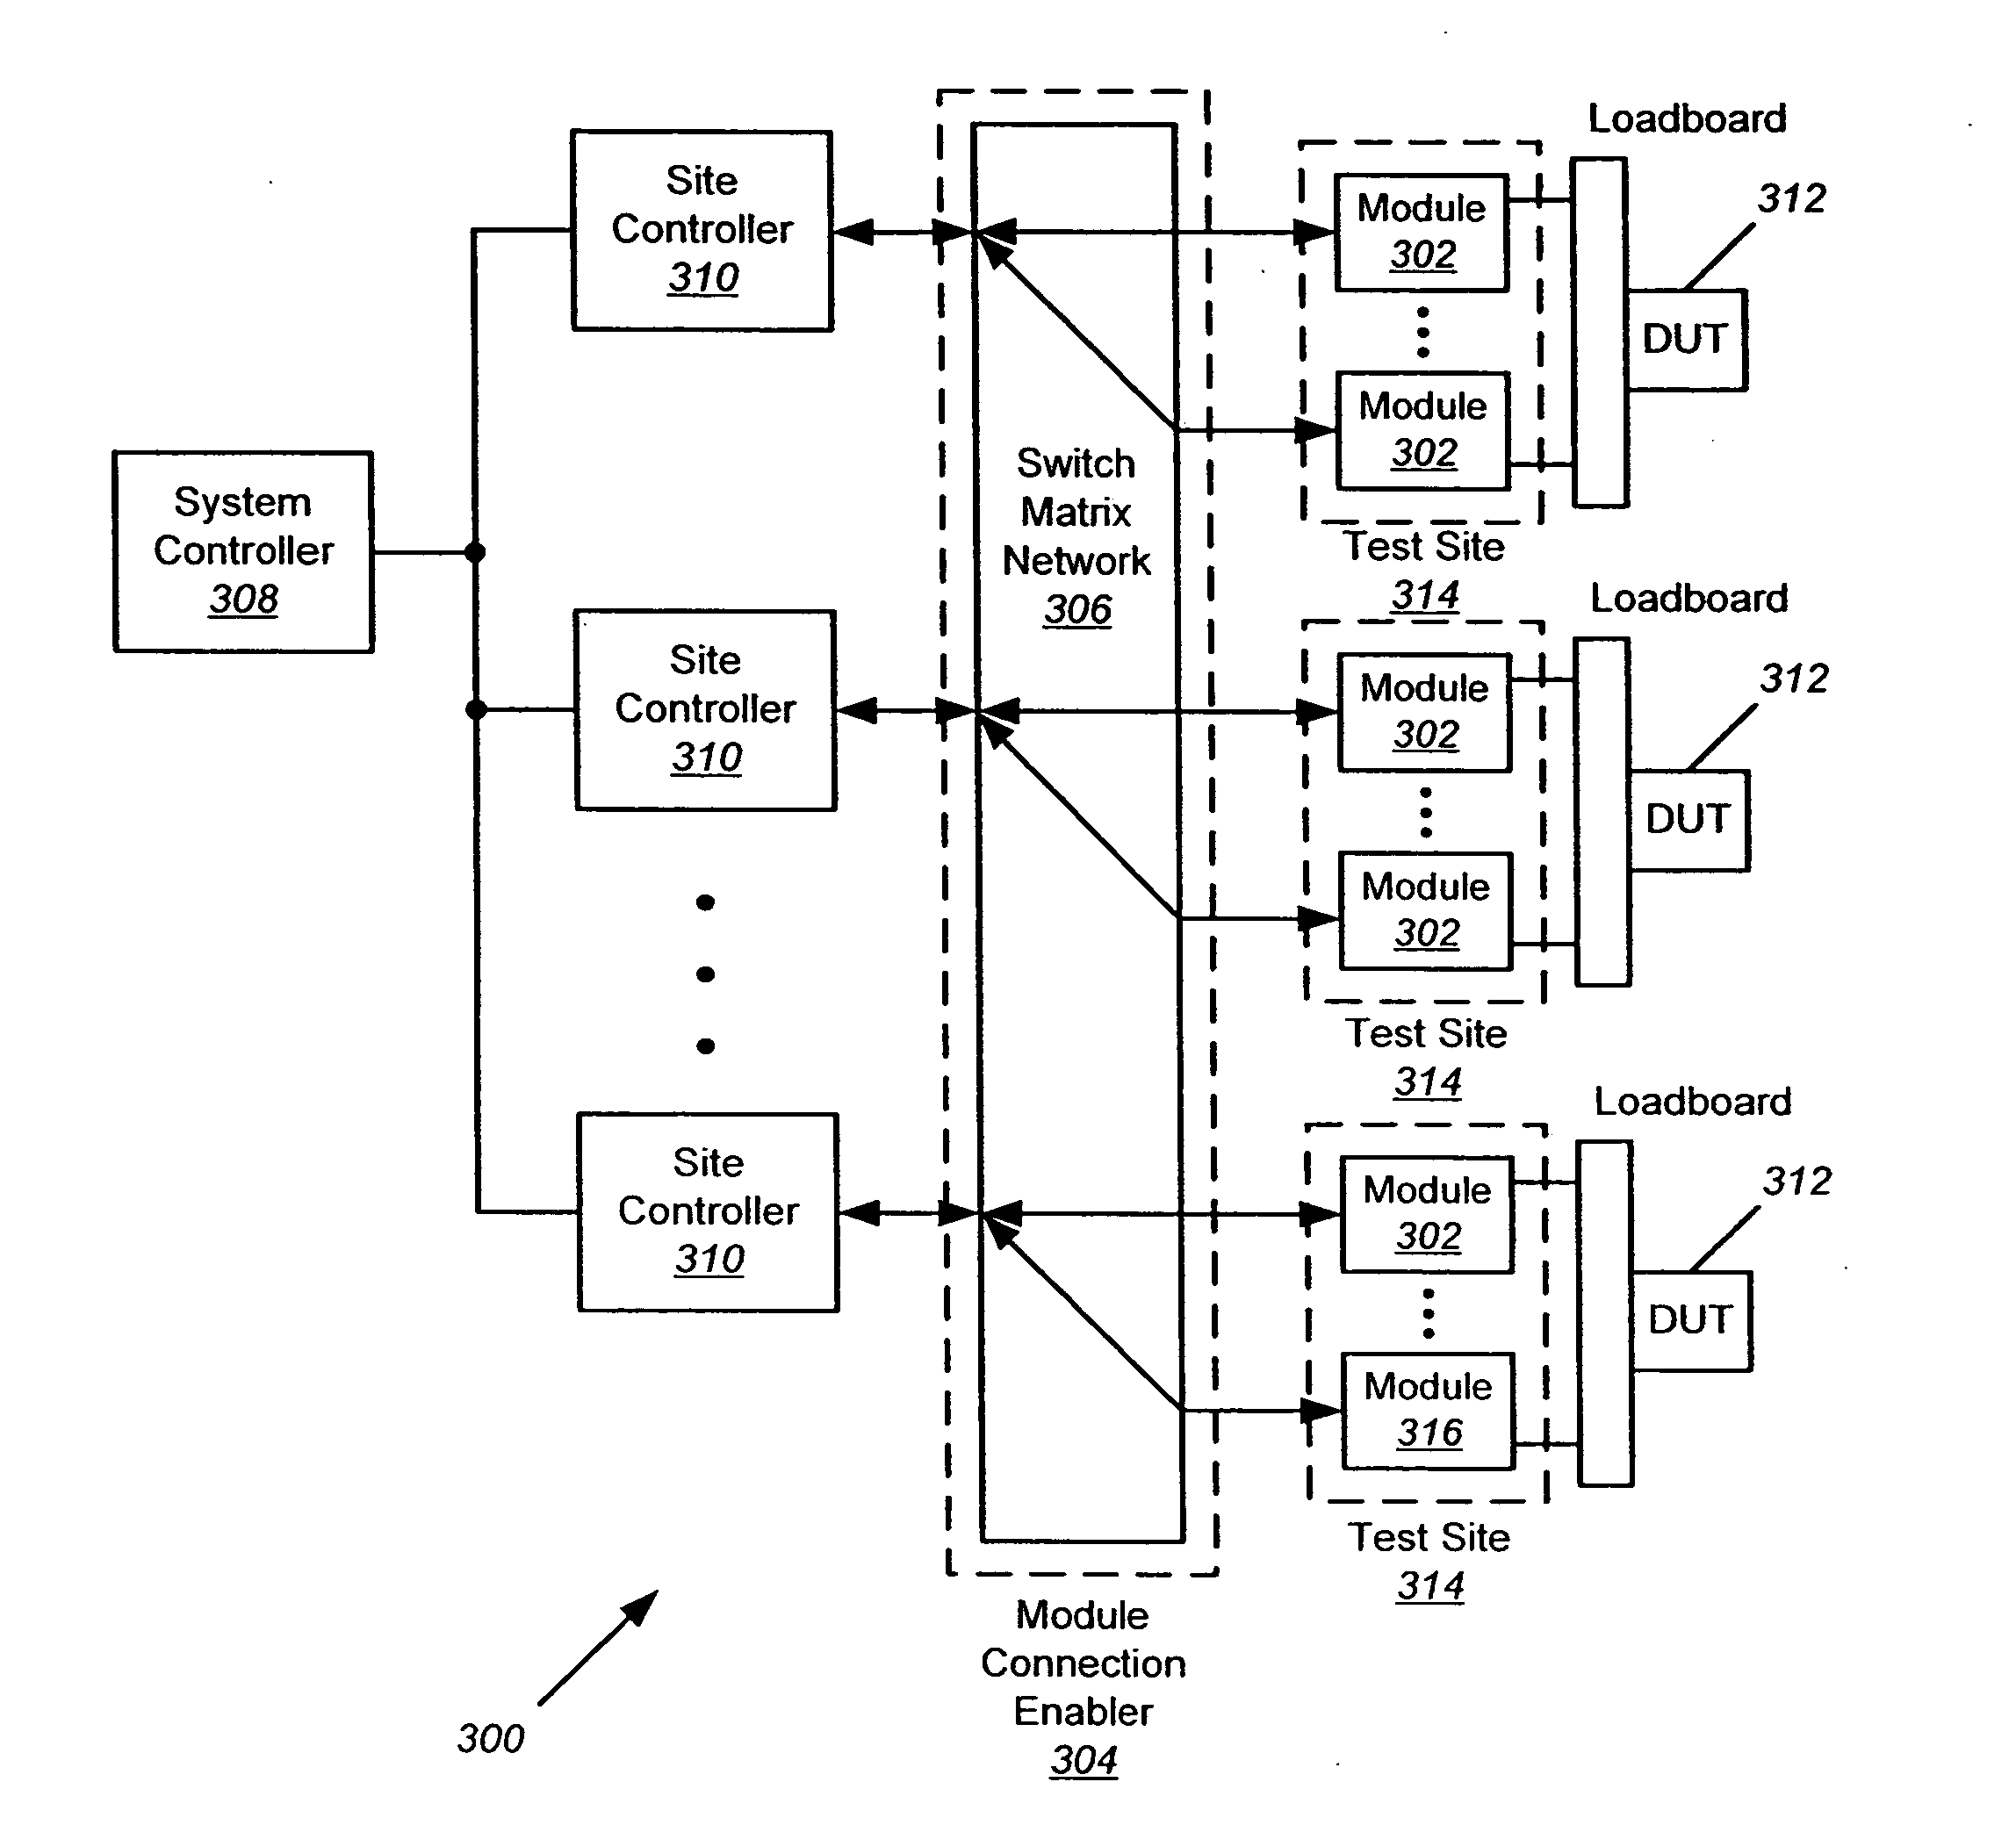 Fabric-based high speed serial crossbar switch for ate